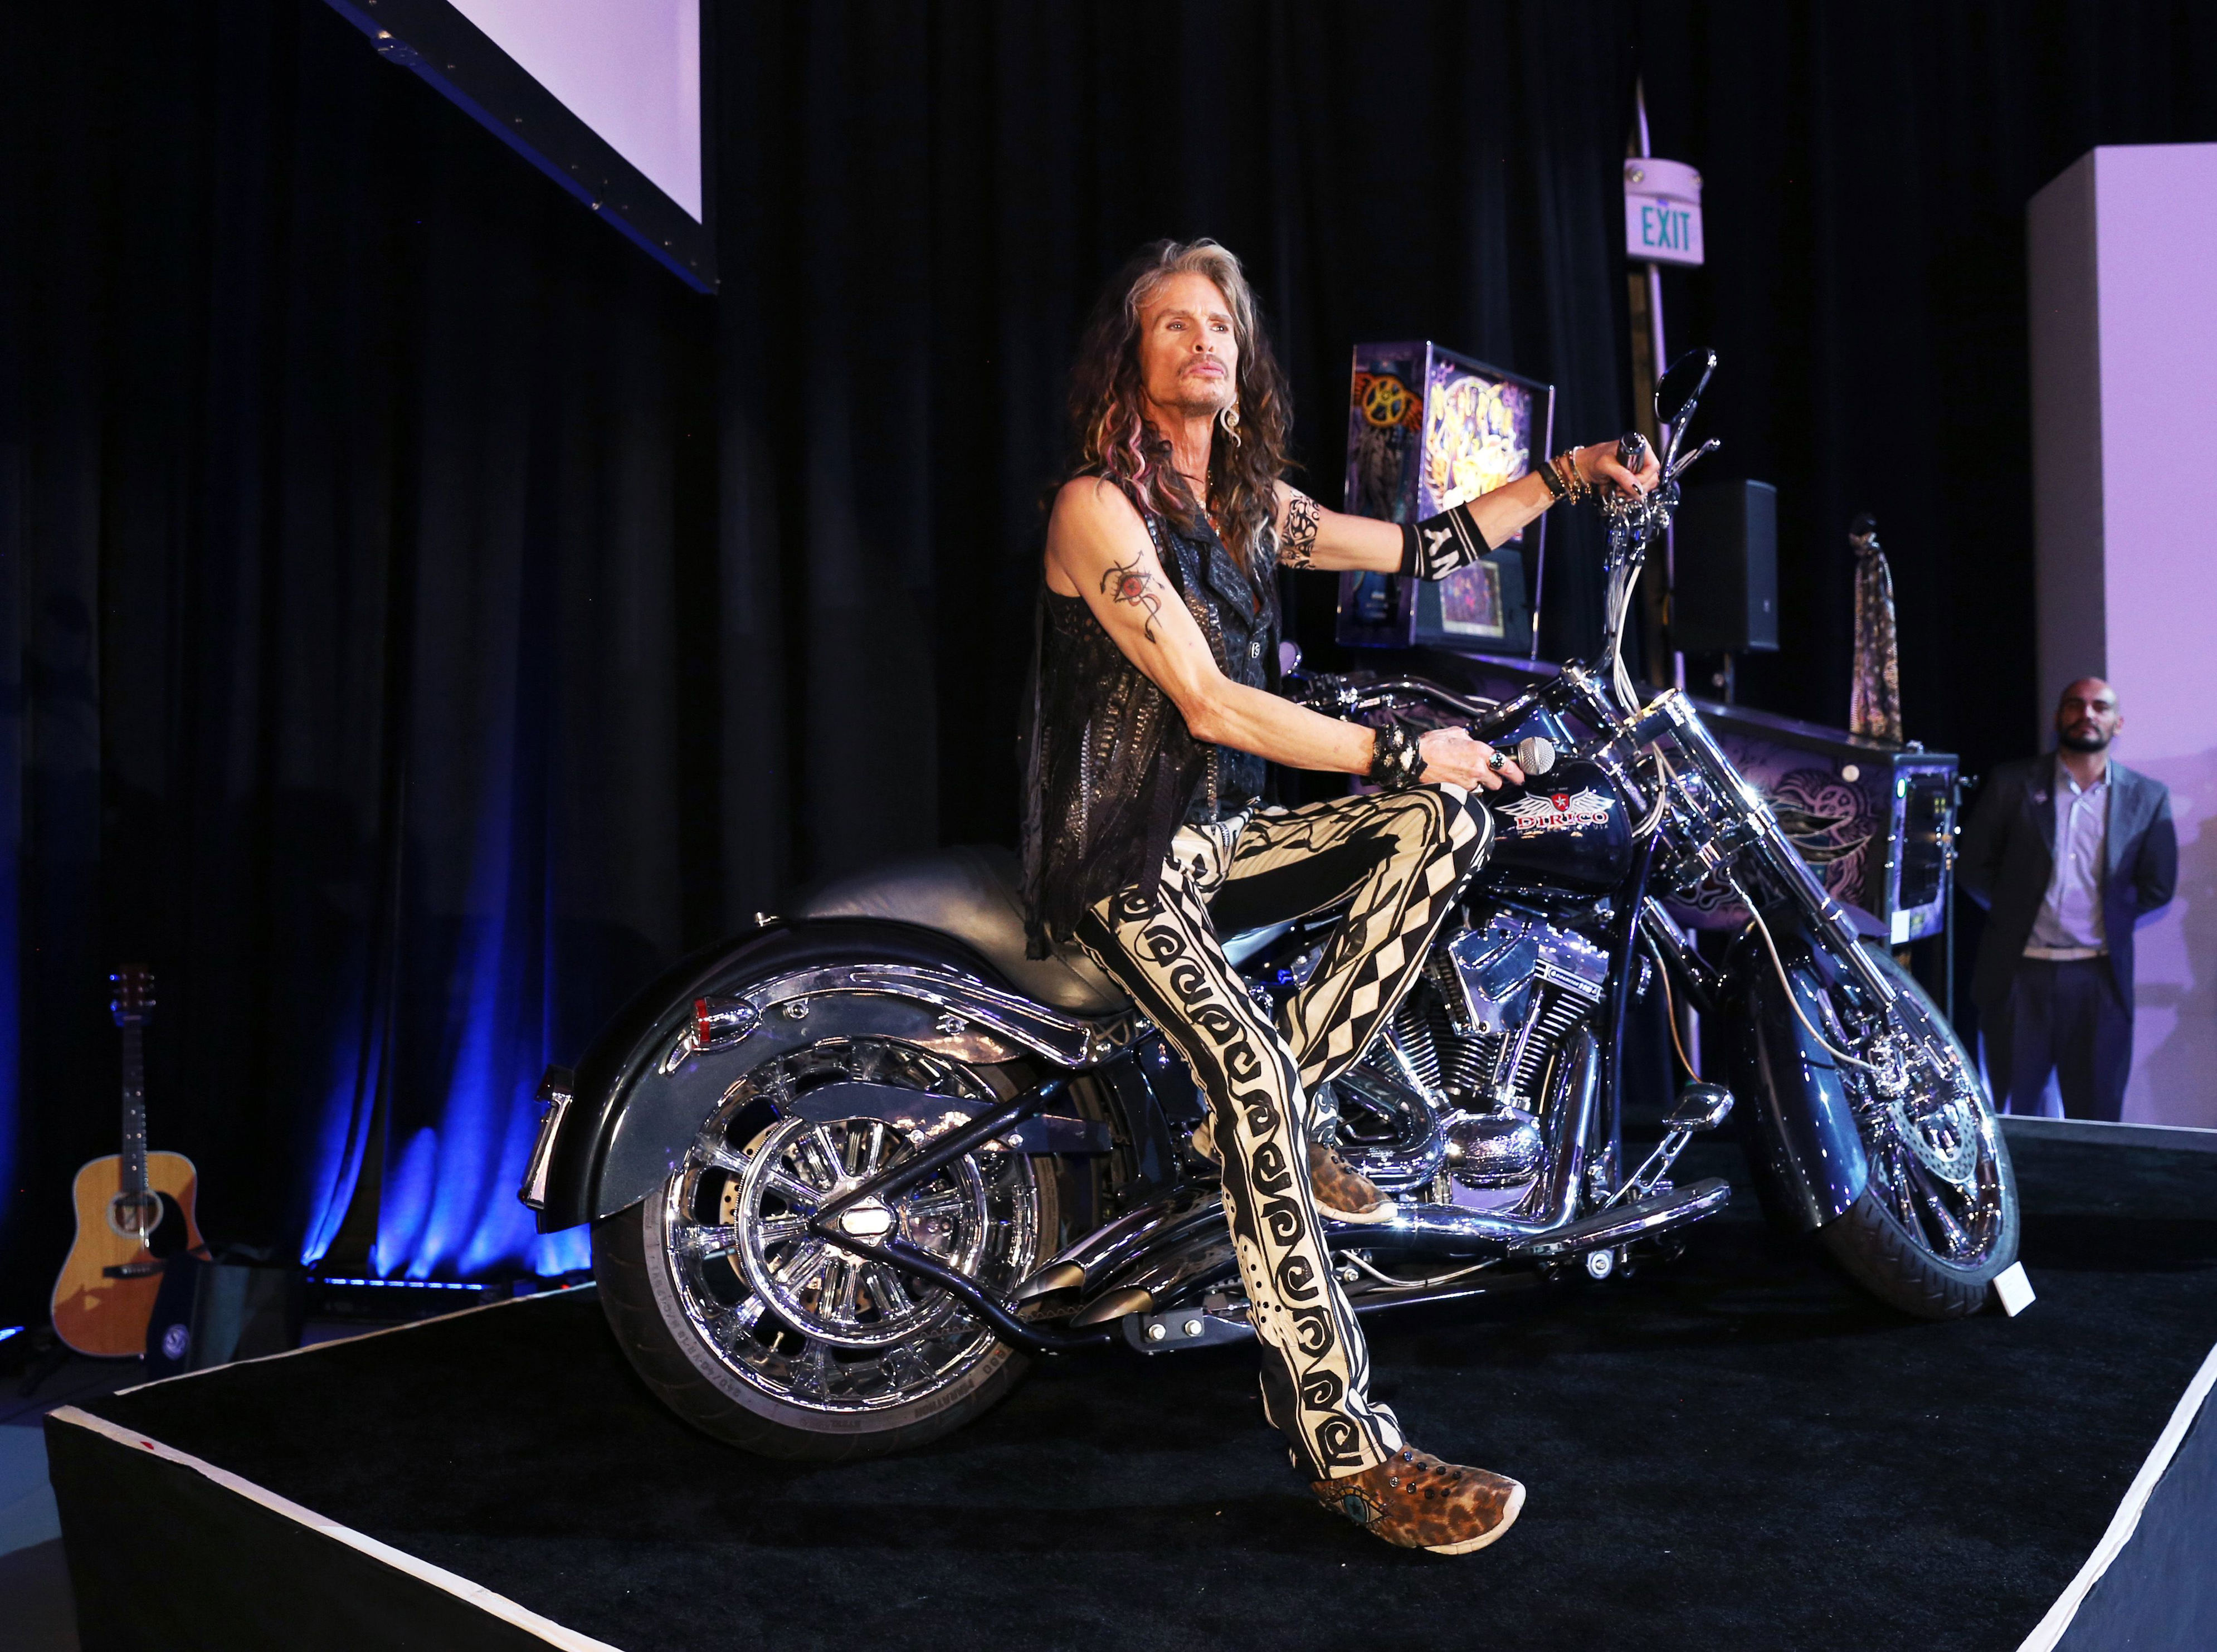 LOS ANGELES, CALIFORNIA - JANUARY 26: Steven Tyler appears onstage during Steven Tyler's Third Annual GRAMMY Awards Viewing Party to benefit Janie’s Fund presented by Live Nation at Raleigh Studios on January 26, 2020 in Los Angeles, California. (Photo by Anna Webber/Getty Images for Janie's Fund)